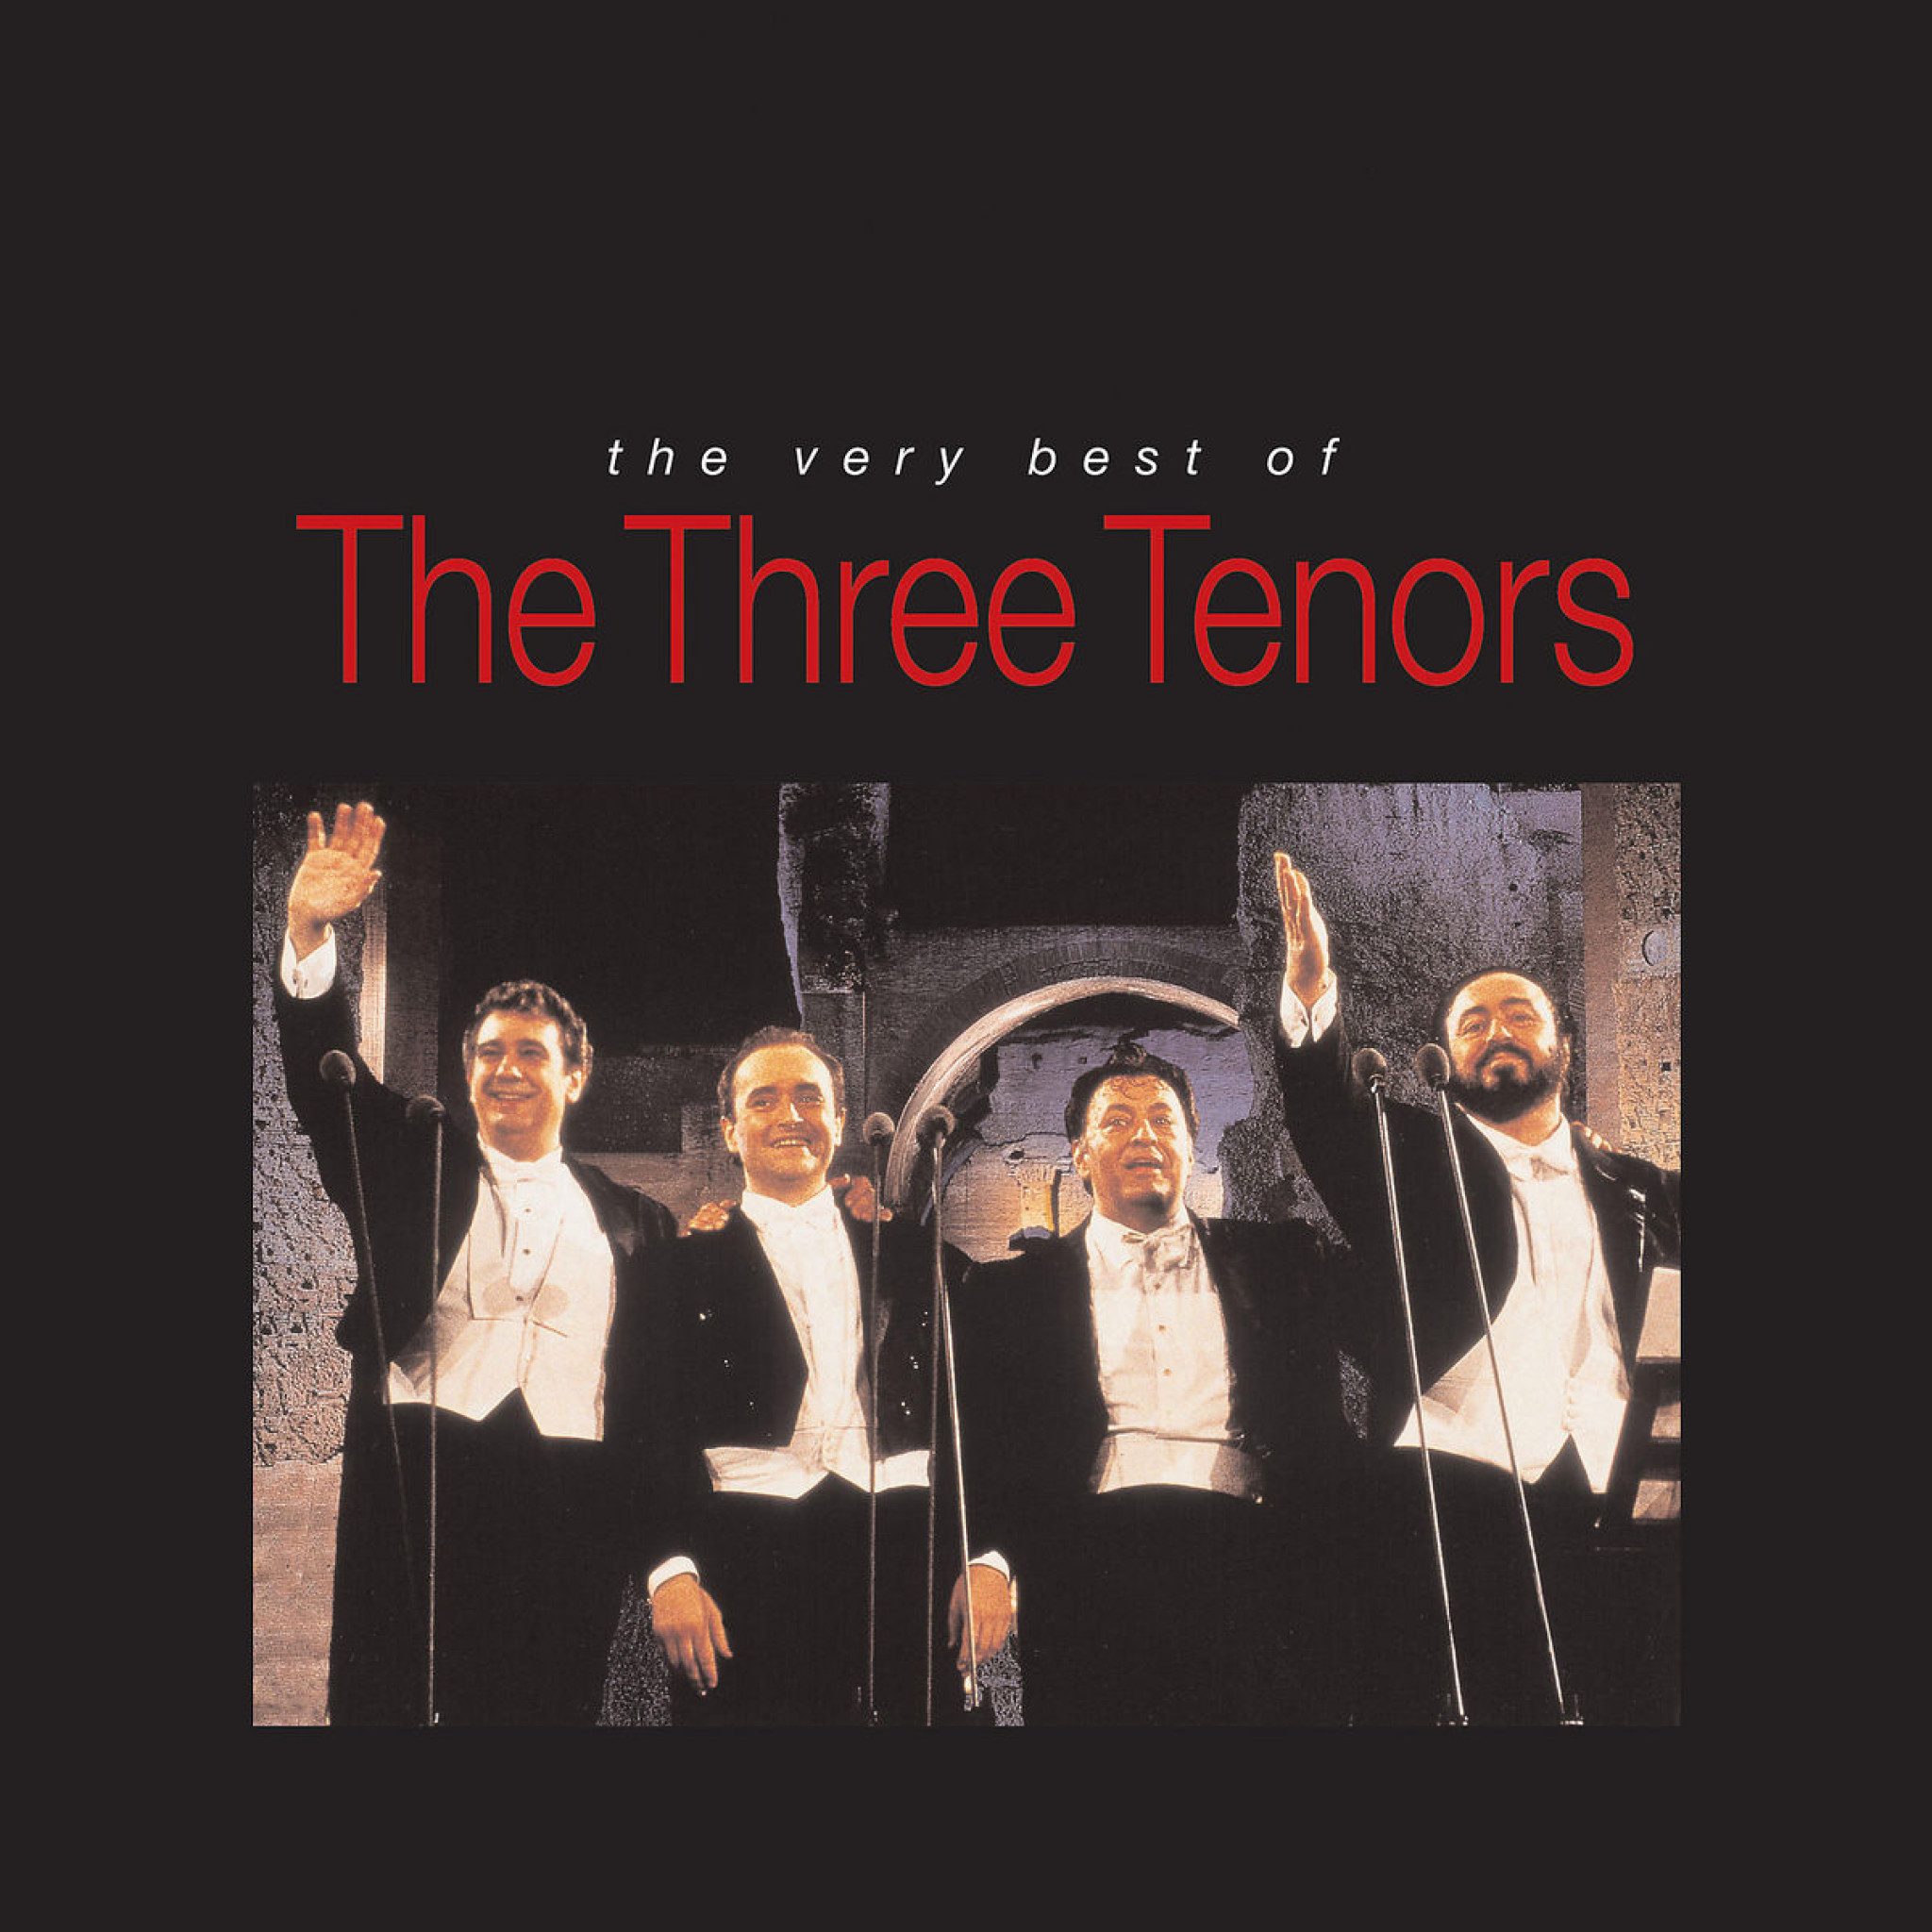 THE VERY BEST OF THE THREE TENORS